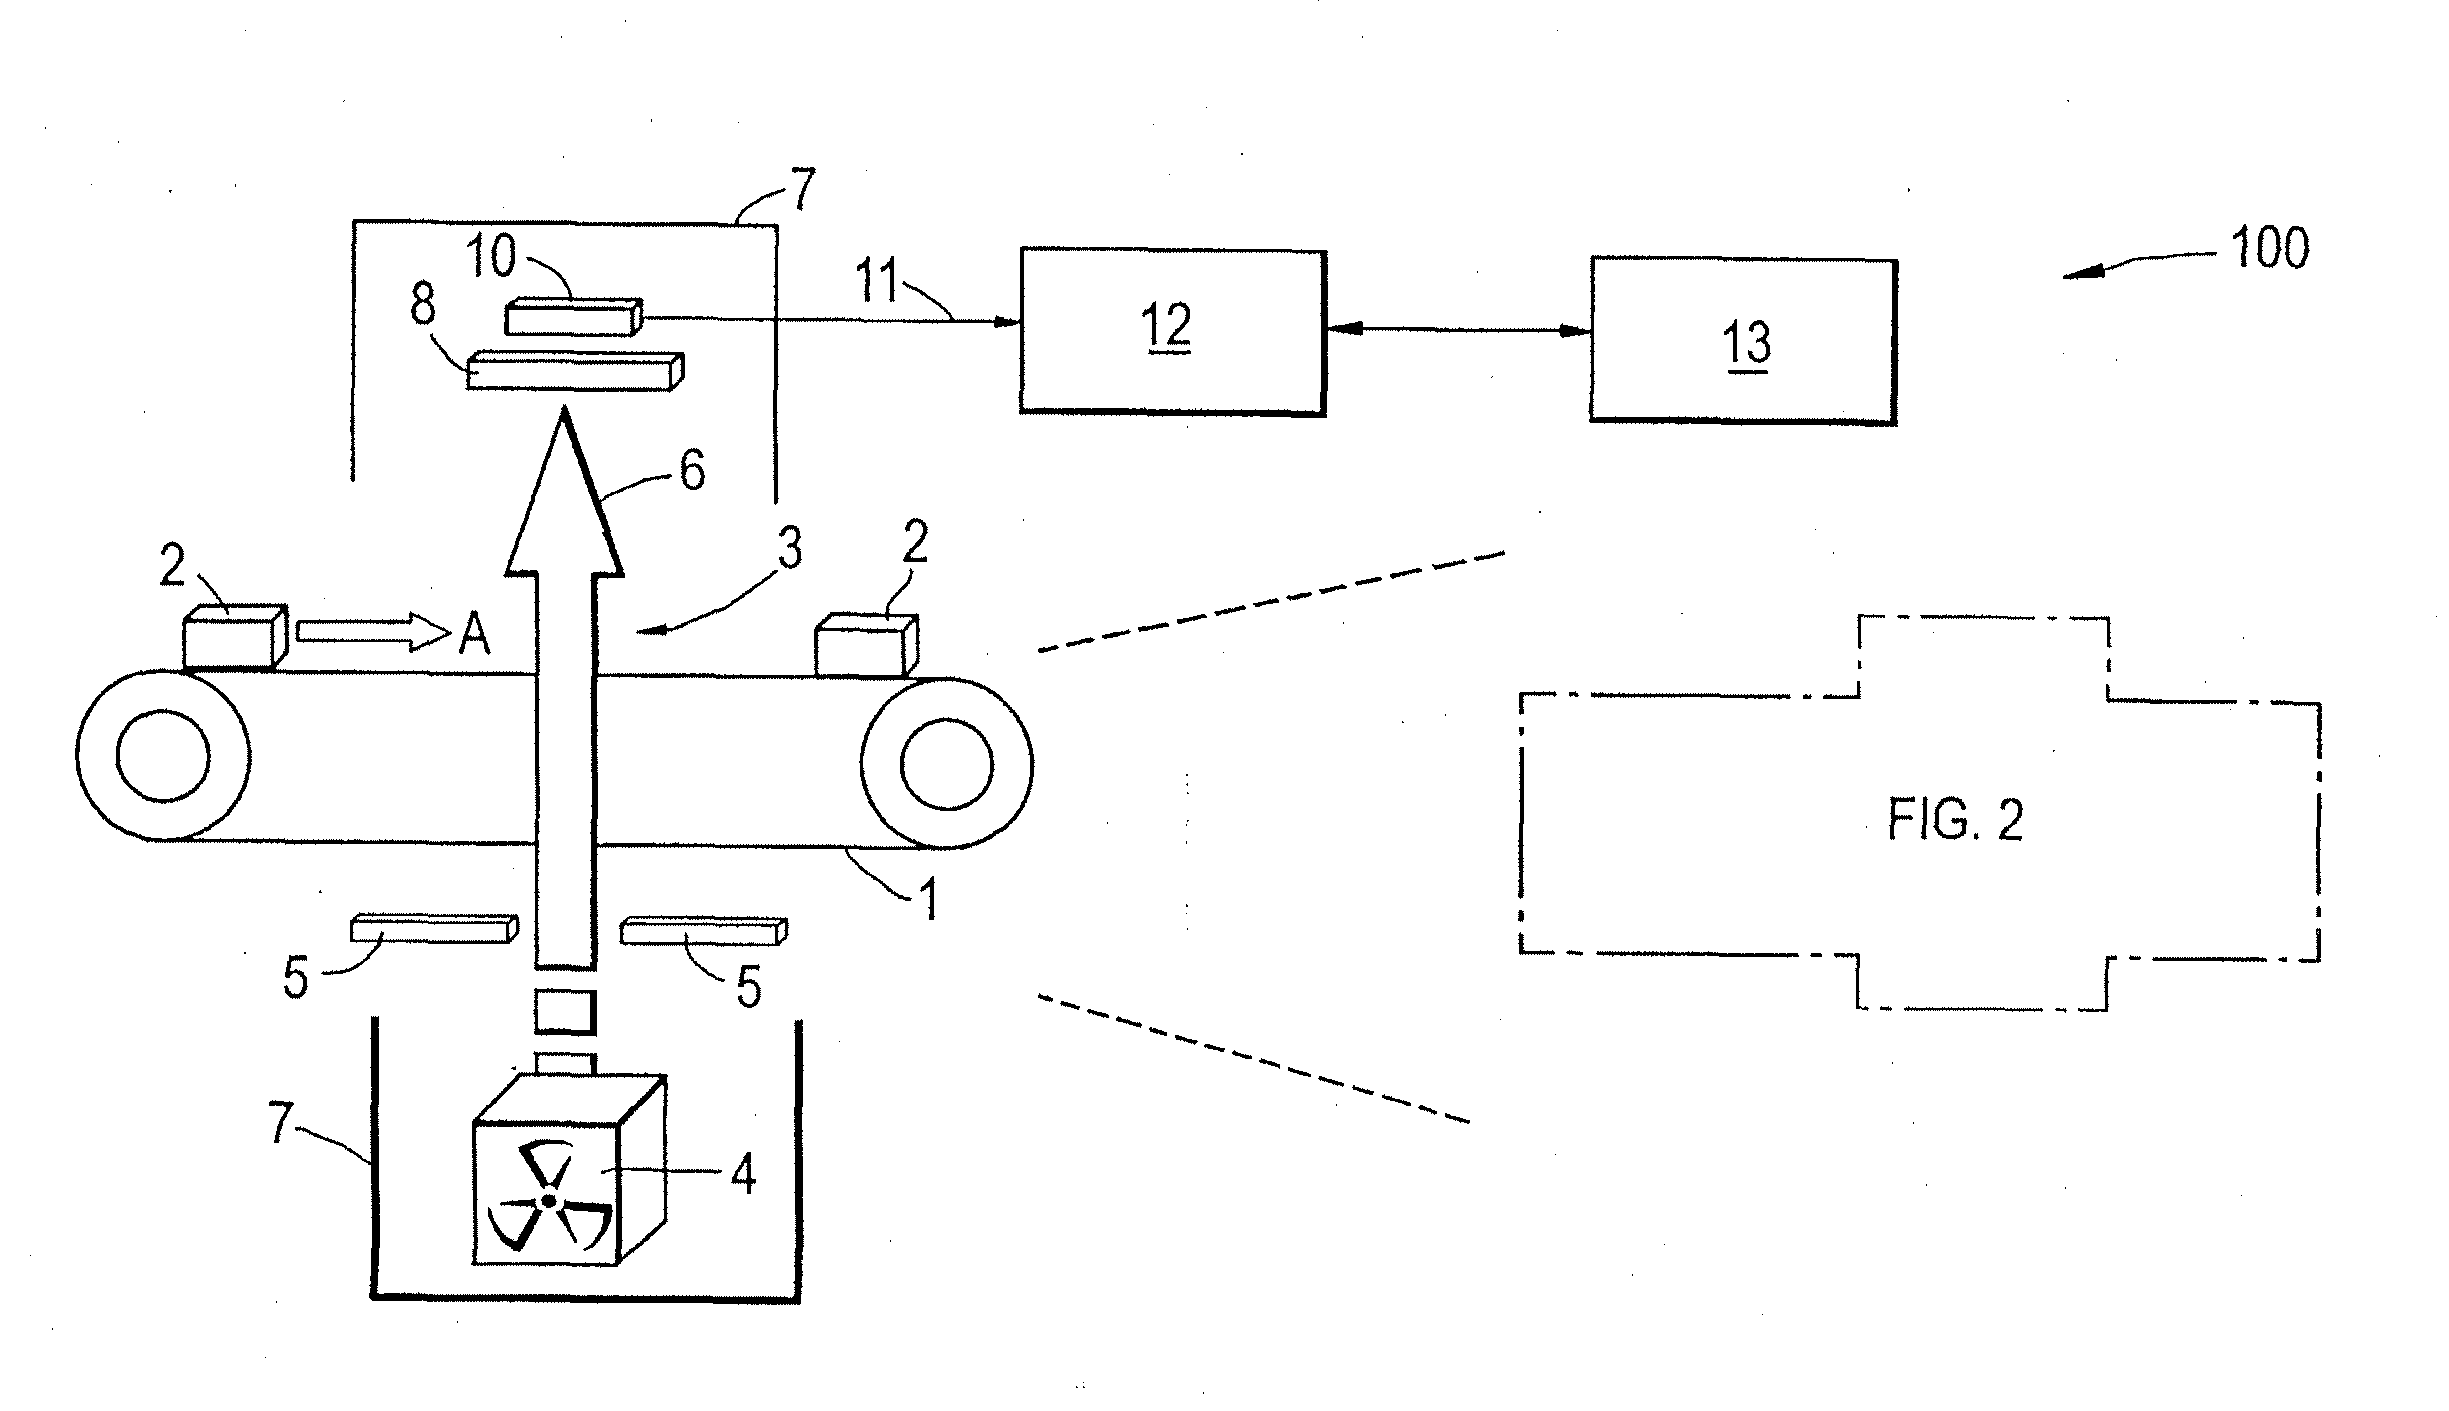 Inspection apparatus and method using penetrating radiation